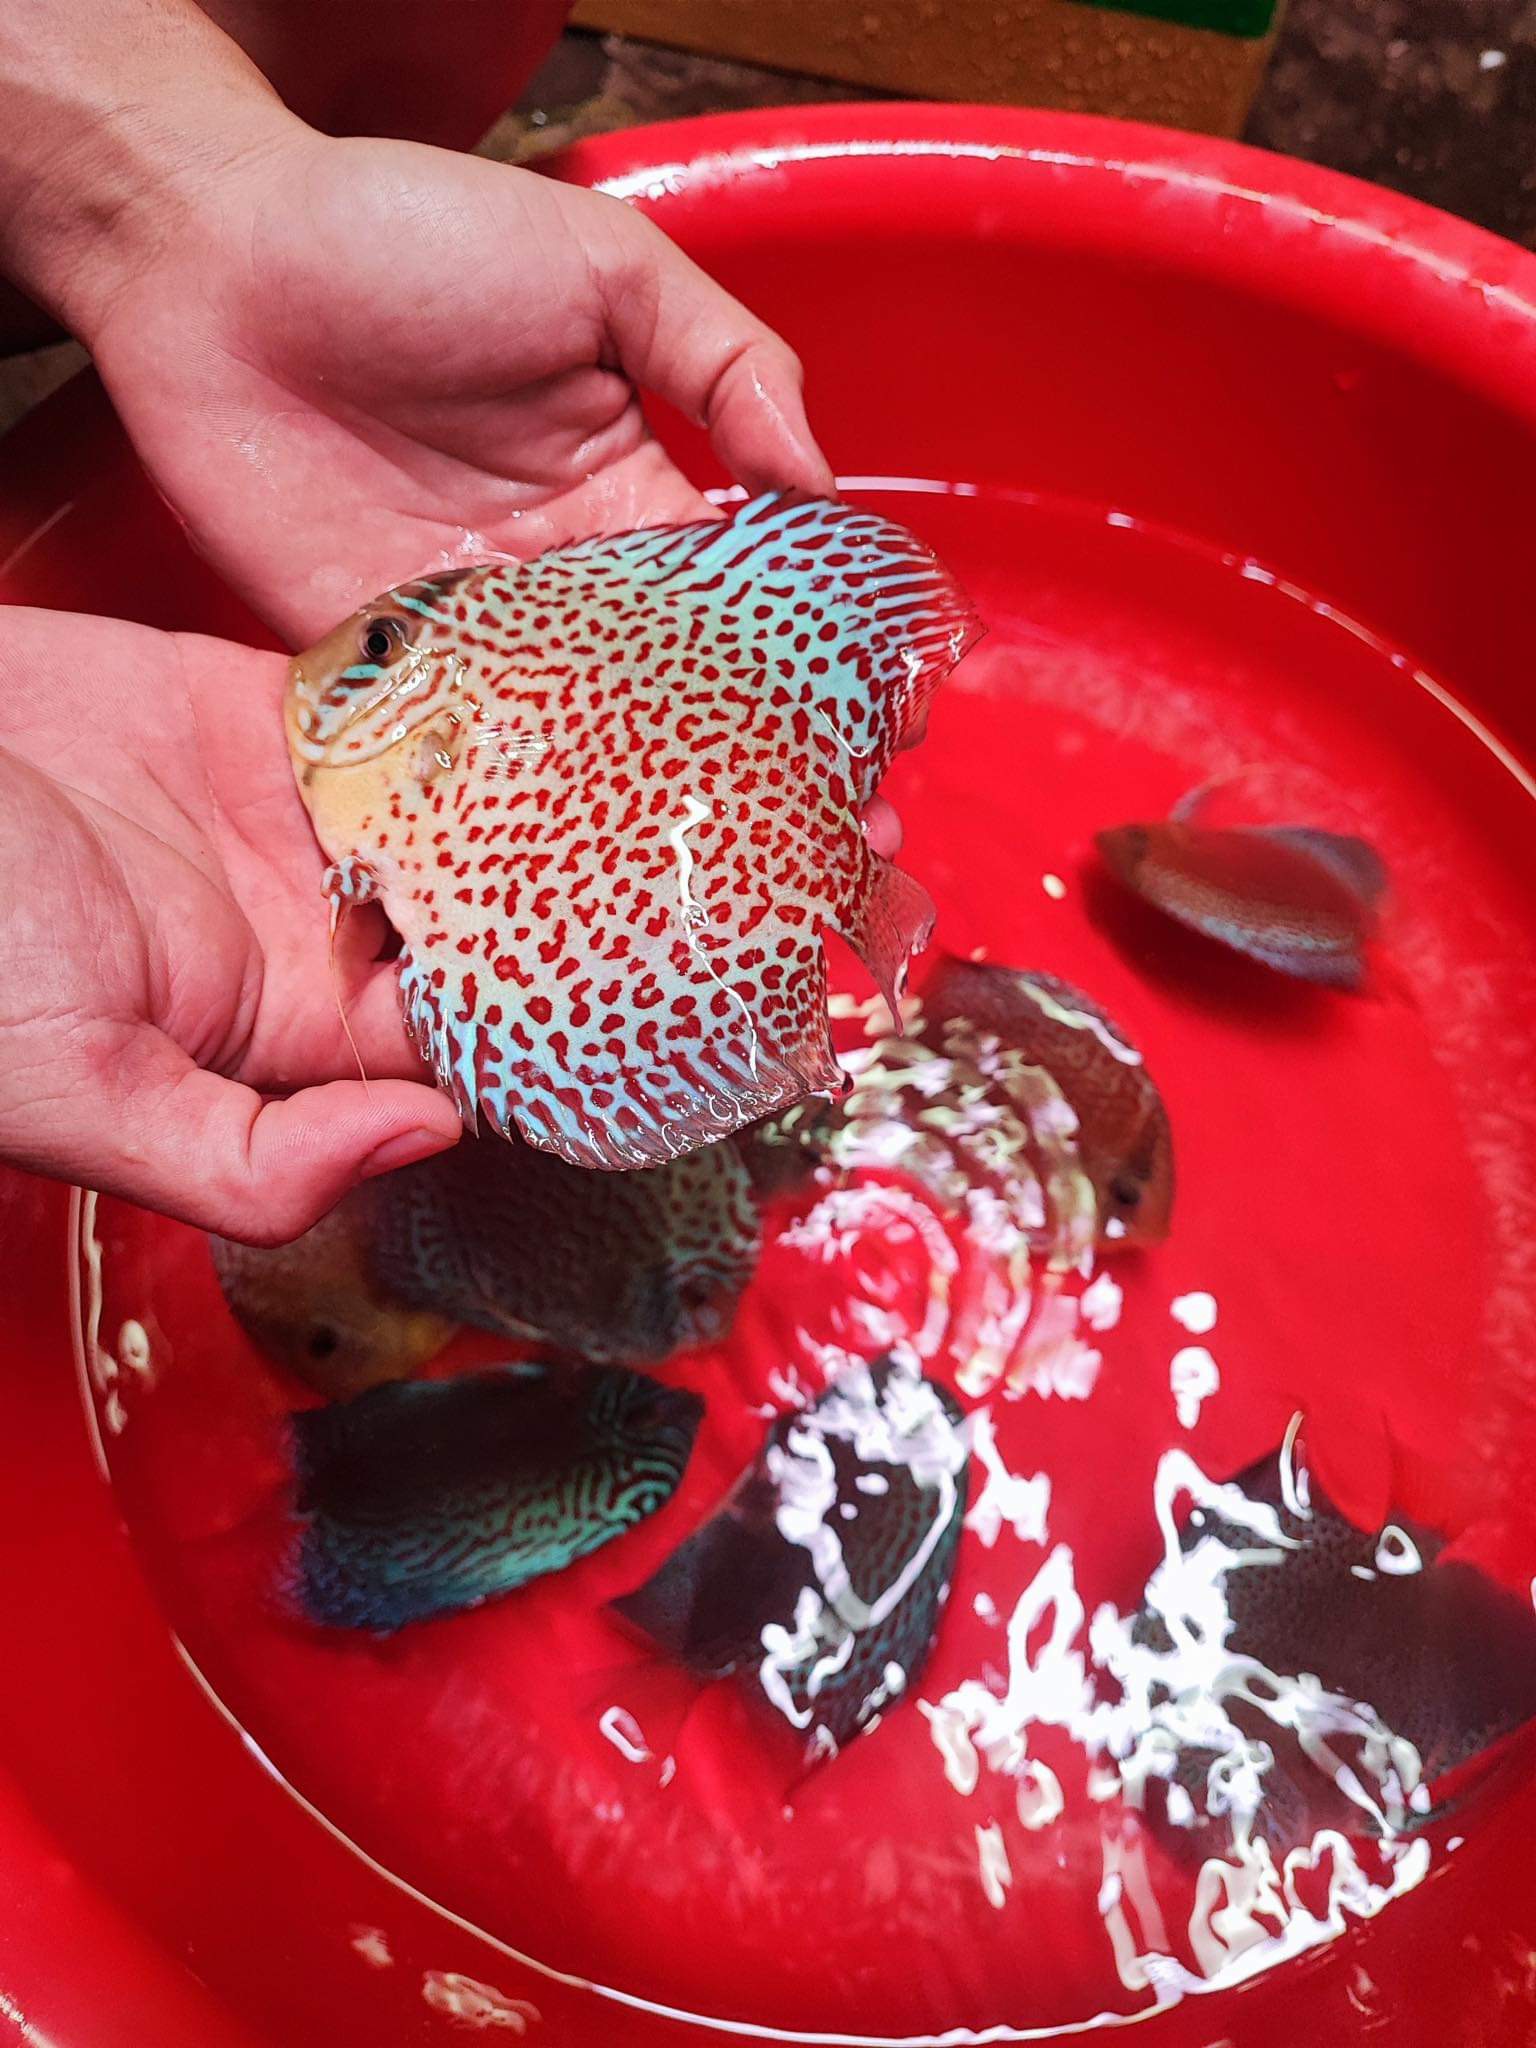 IP DISCUS RING LEOPARD Prebook your... - The Other Aquarist | Facebook